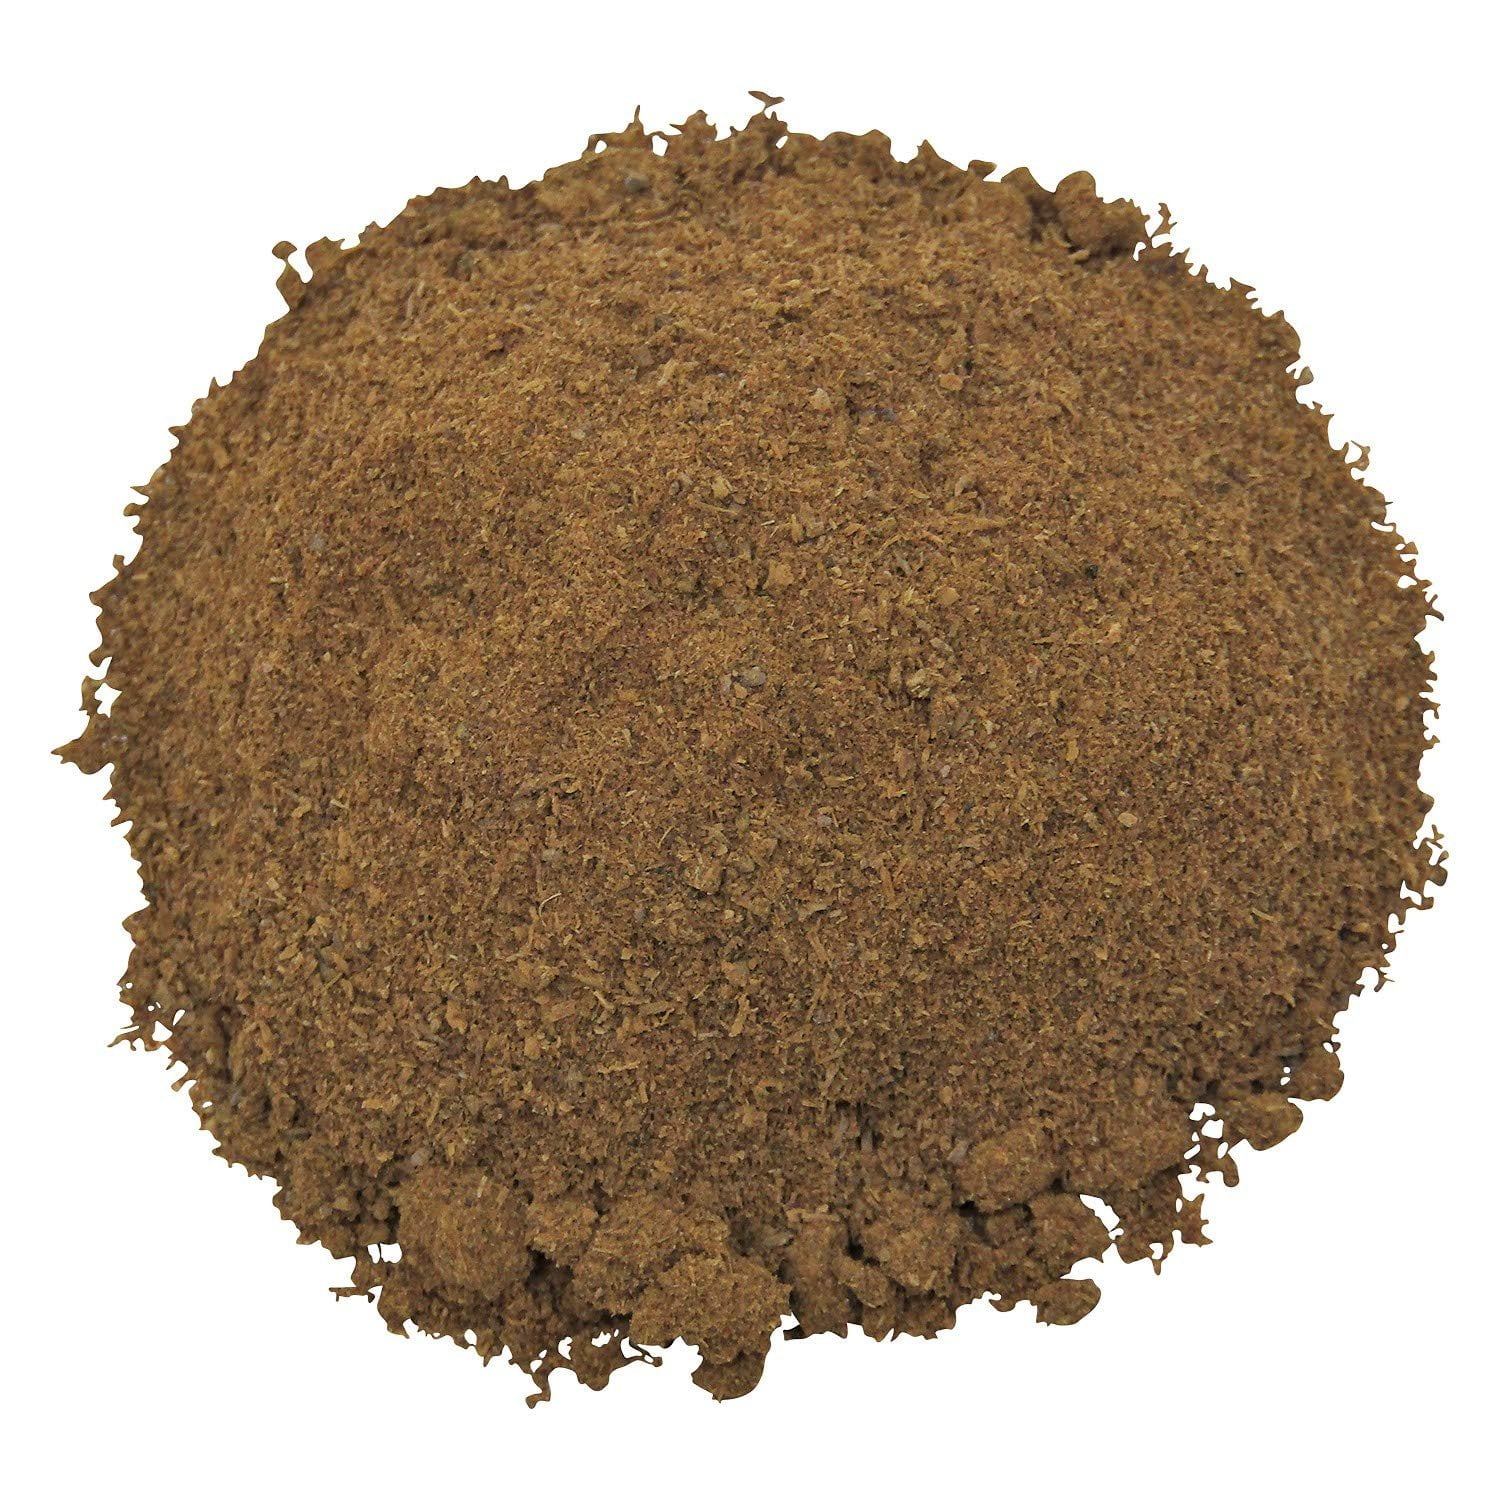 Ground Dried Mushroom Powder by Its Delish, 6 oz Medium Jar Dark Chilean Dehydrated and Ground Mushrooms for Cooking and Flavoring